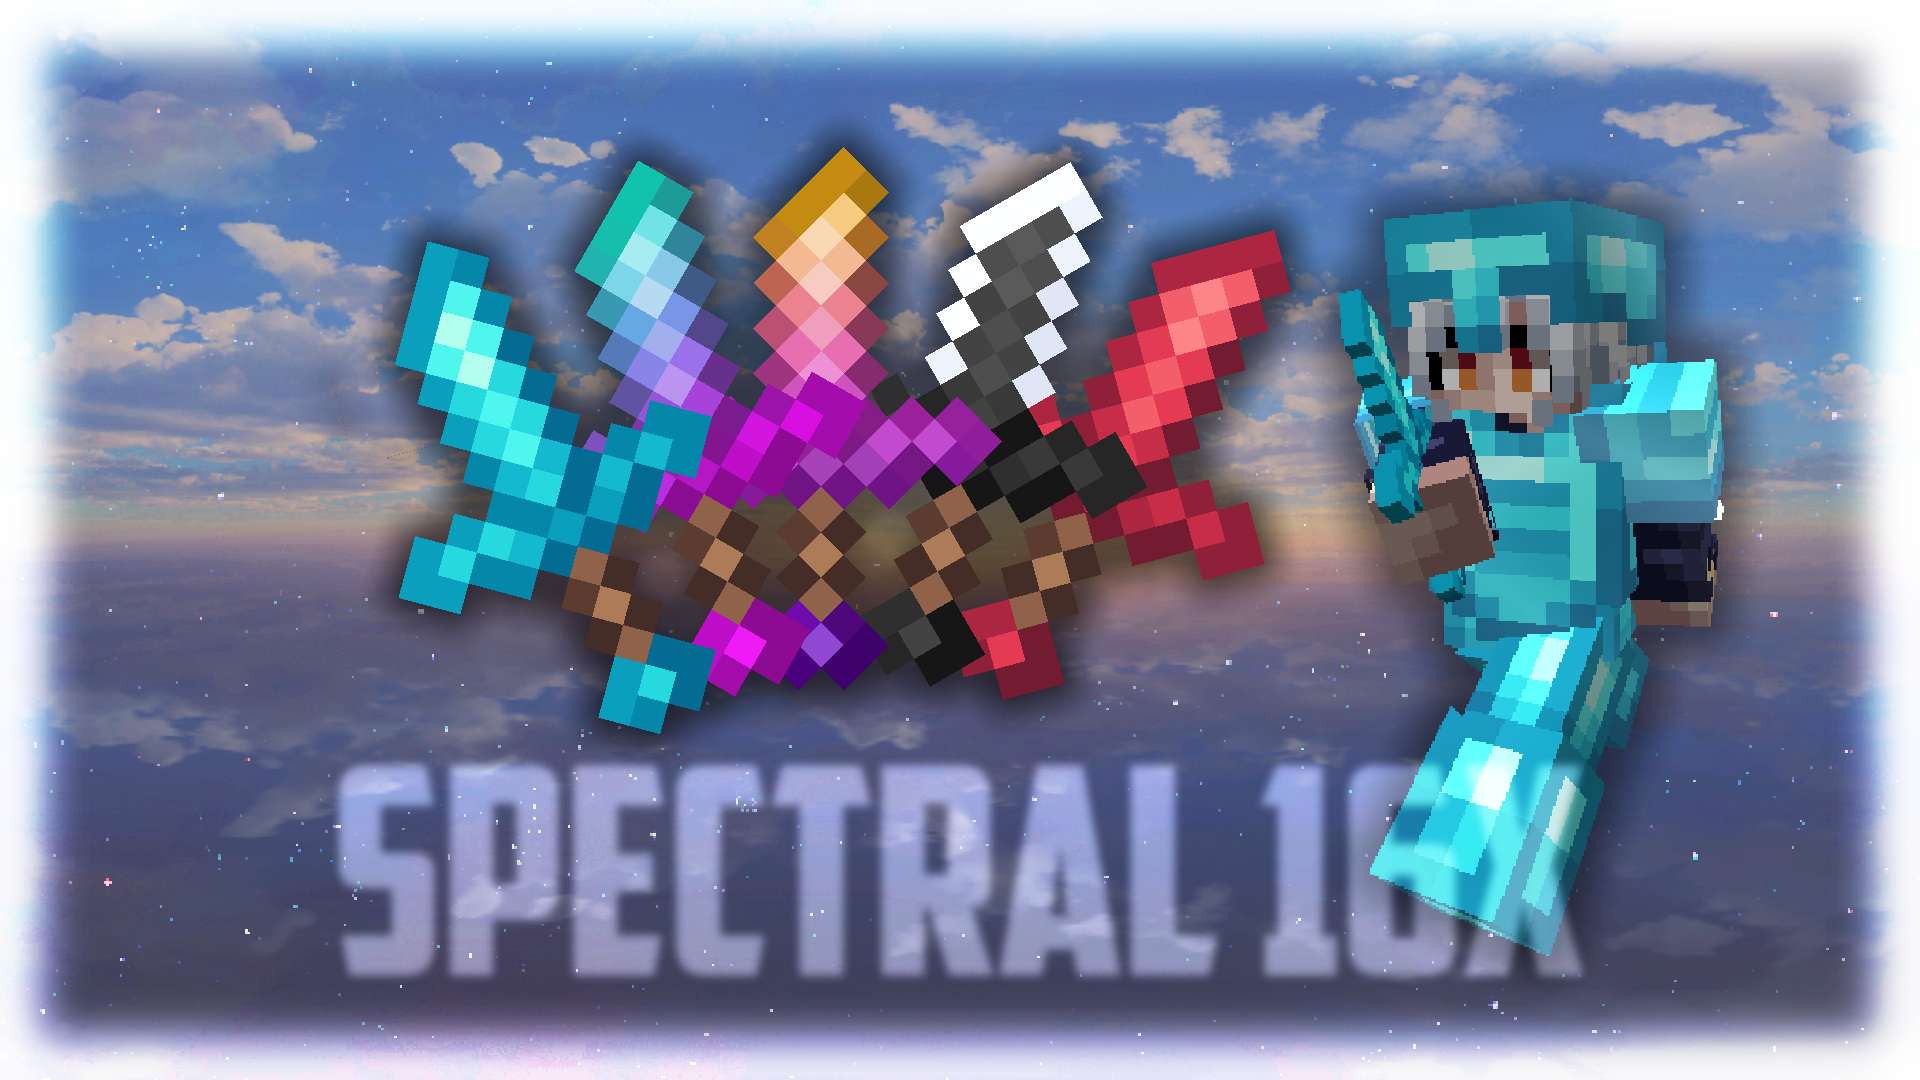 Spectral - Pink 16 by Zlax on PvPRP